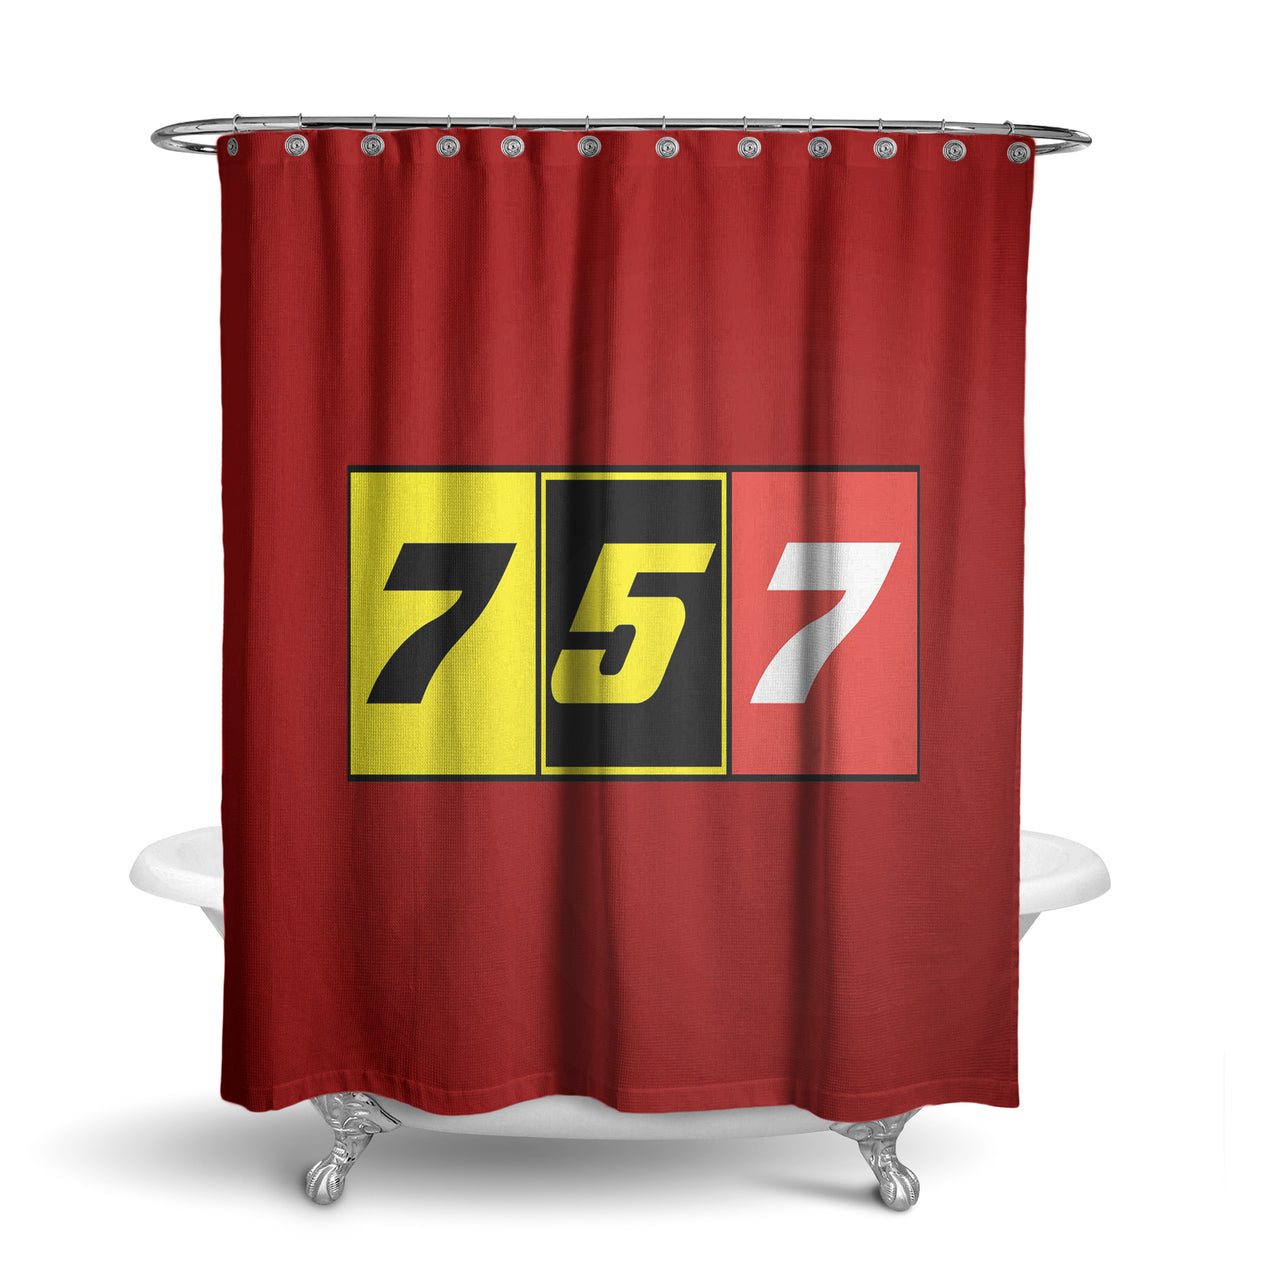 Flat Colourful 757 Designed Shower Curtains